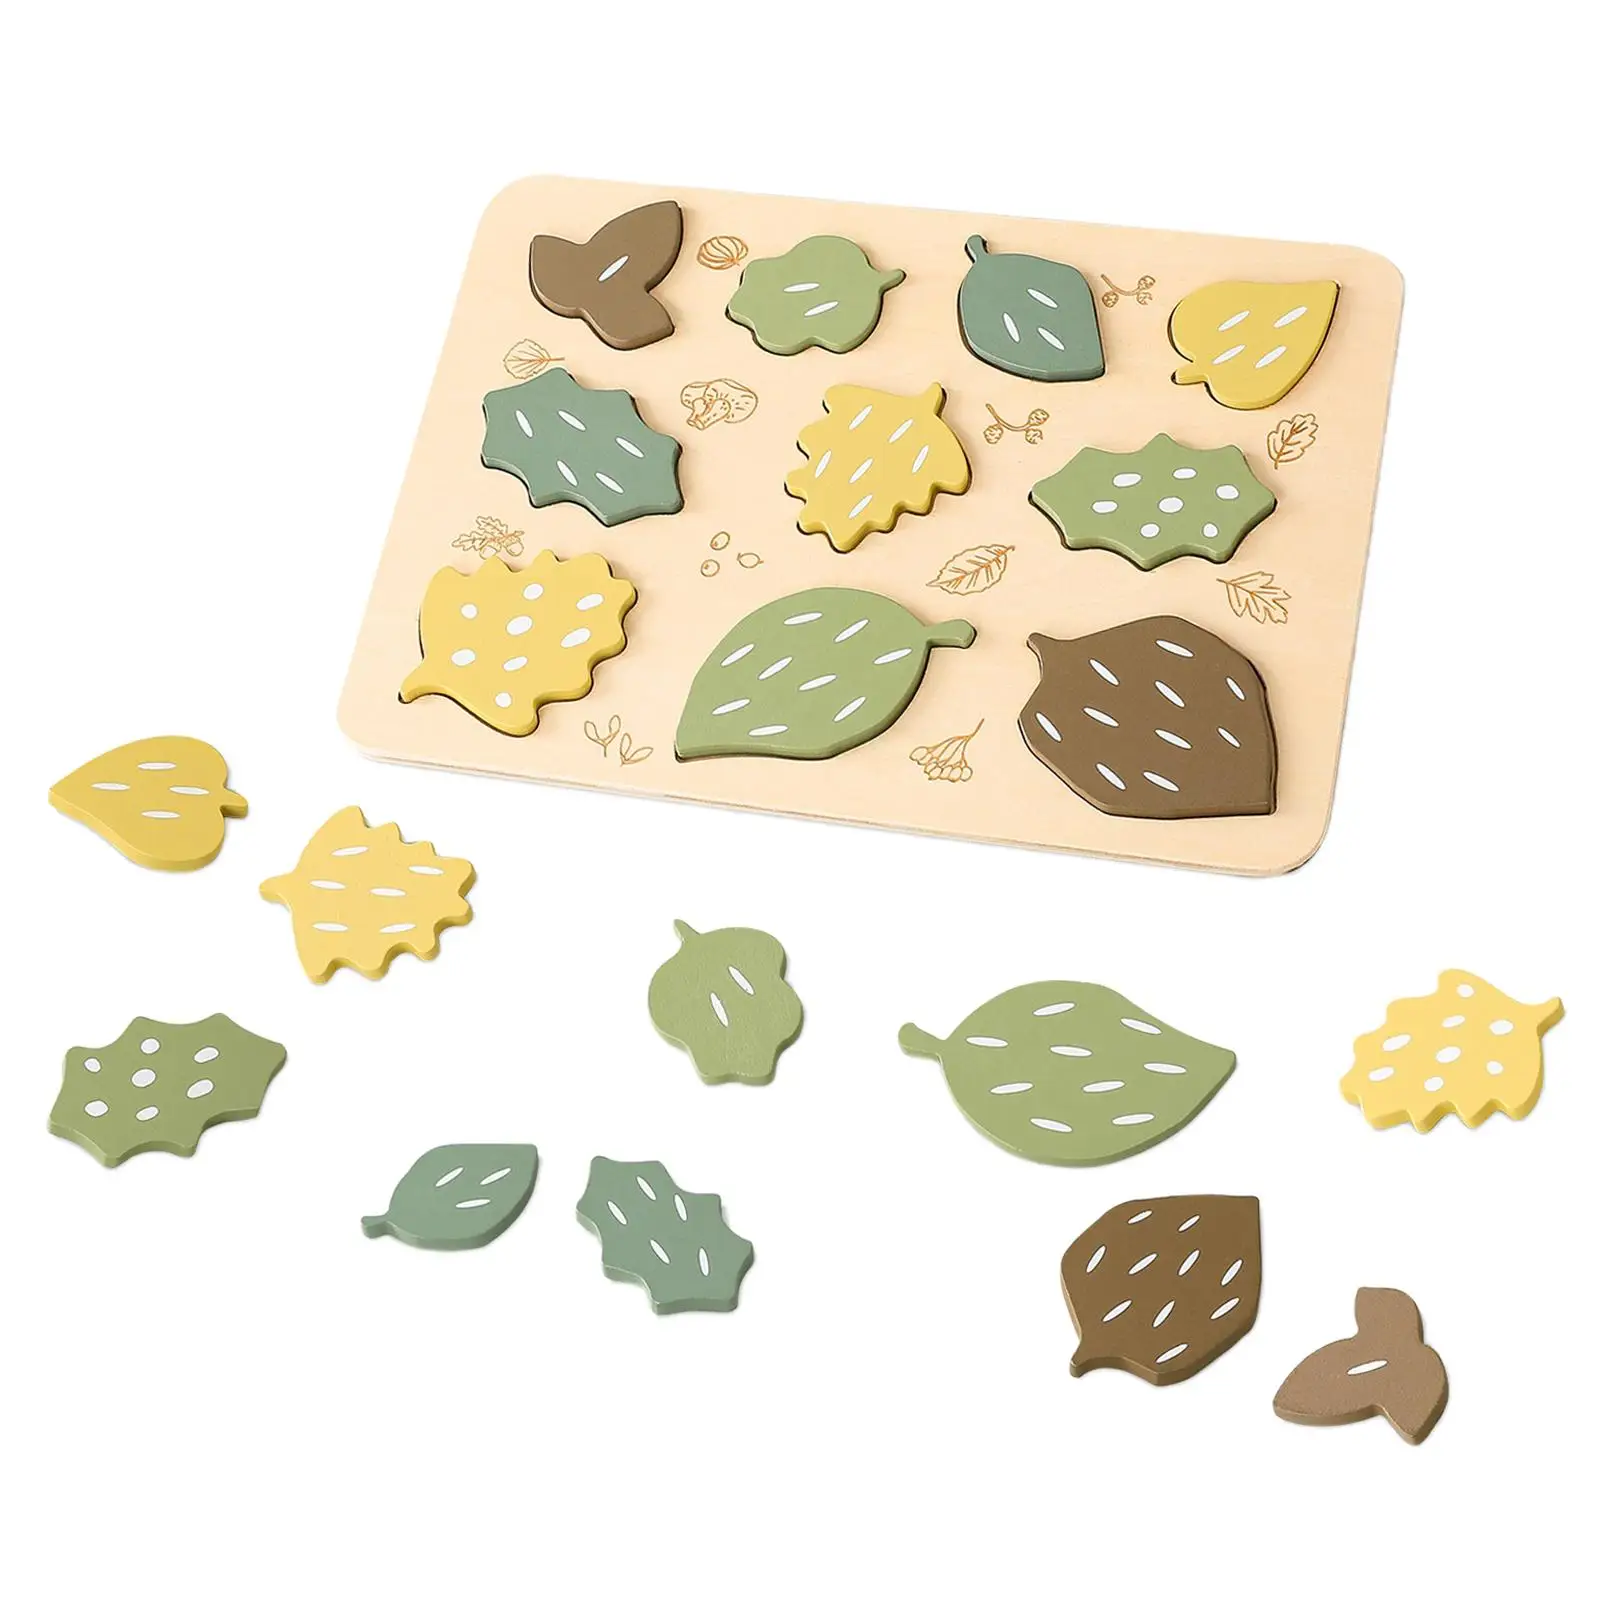 Wooden Leaf Jigsaw Puzzles Hand Eye Coordination Educational Sorting Puzzle Montessori Colorful Shape for Girls Toddlers Boys